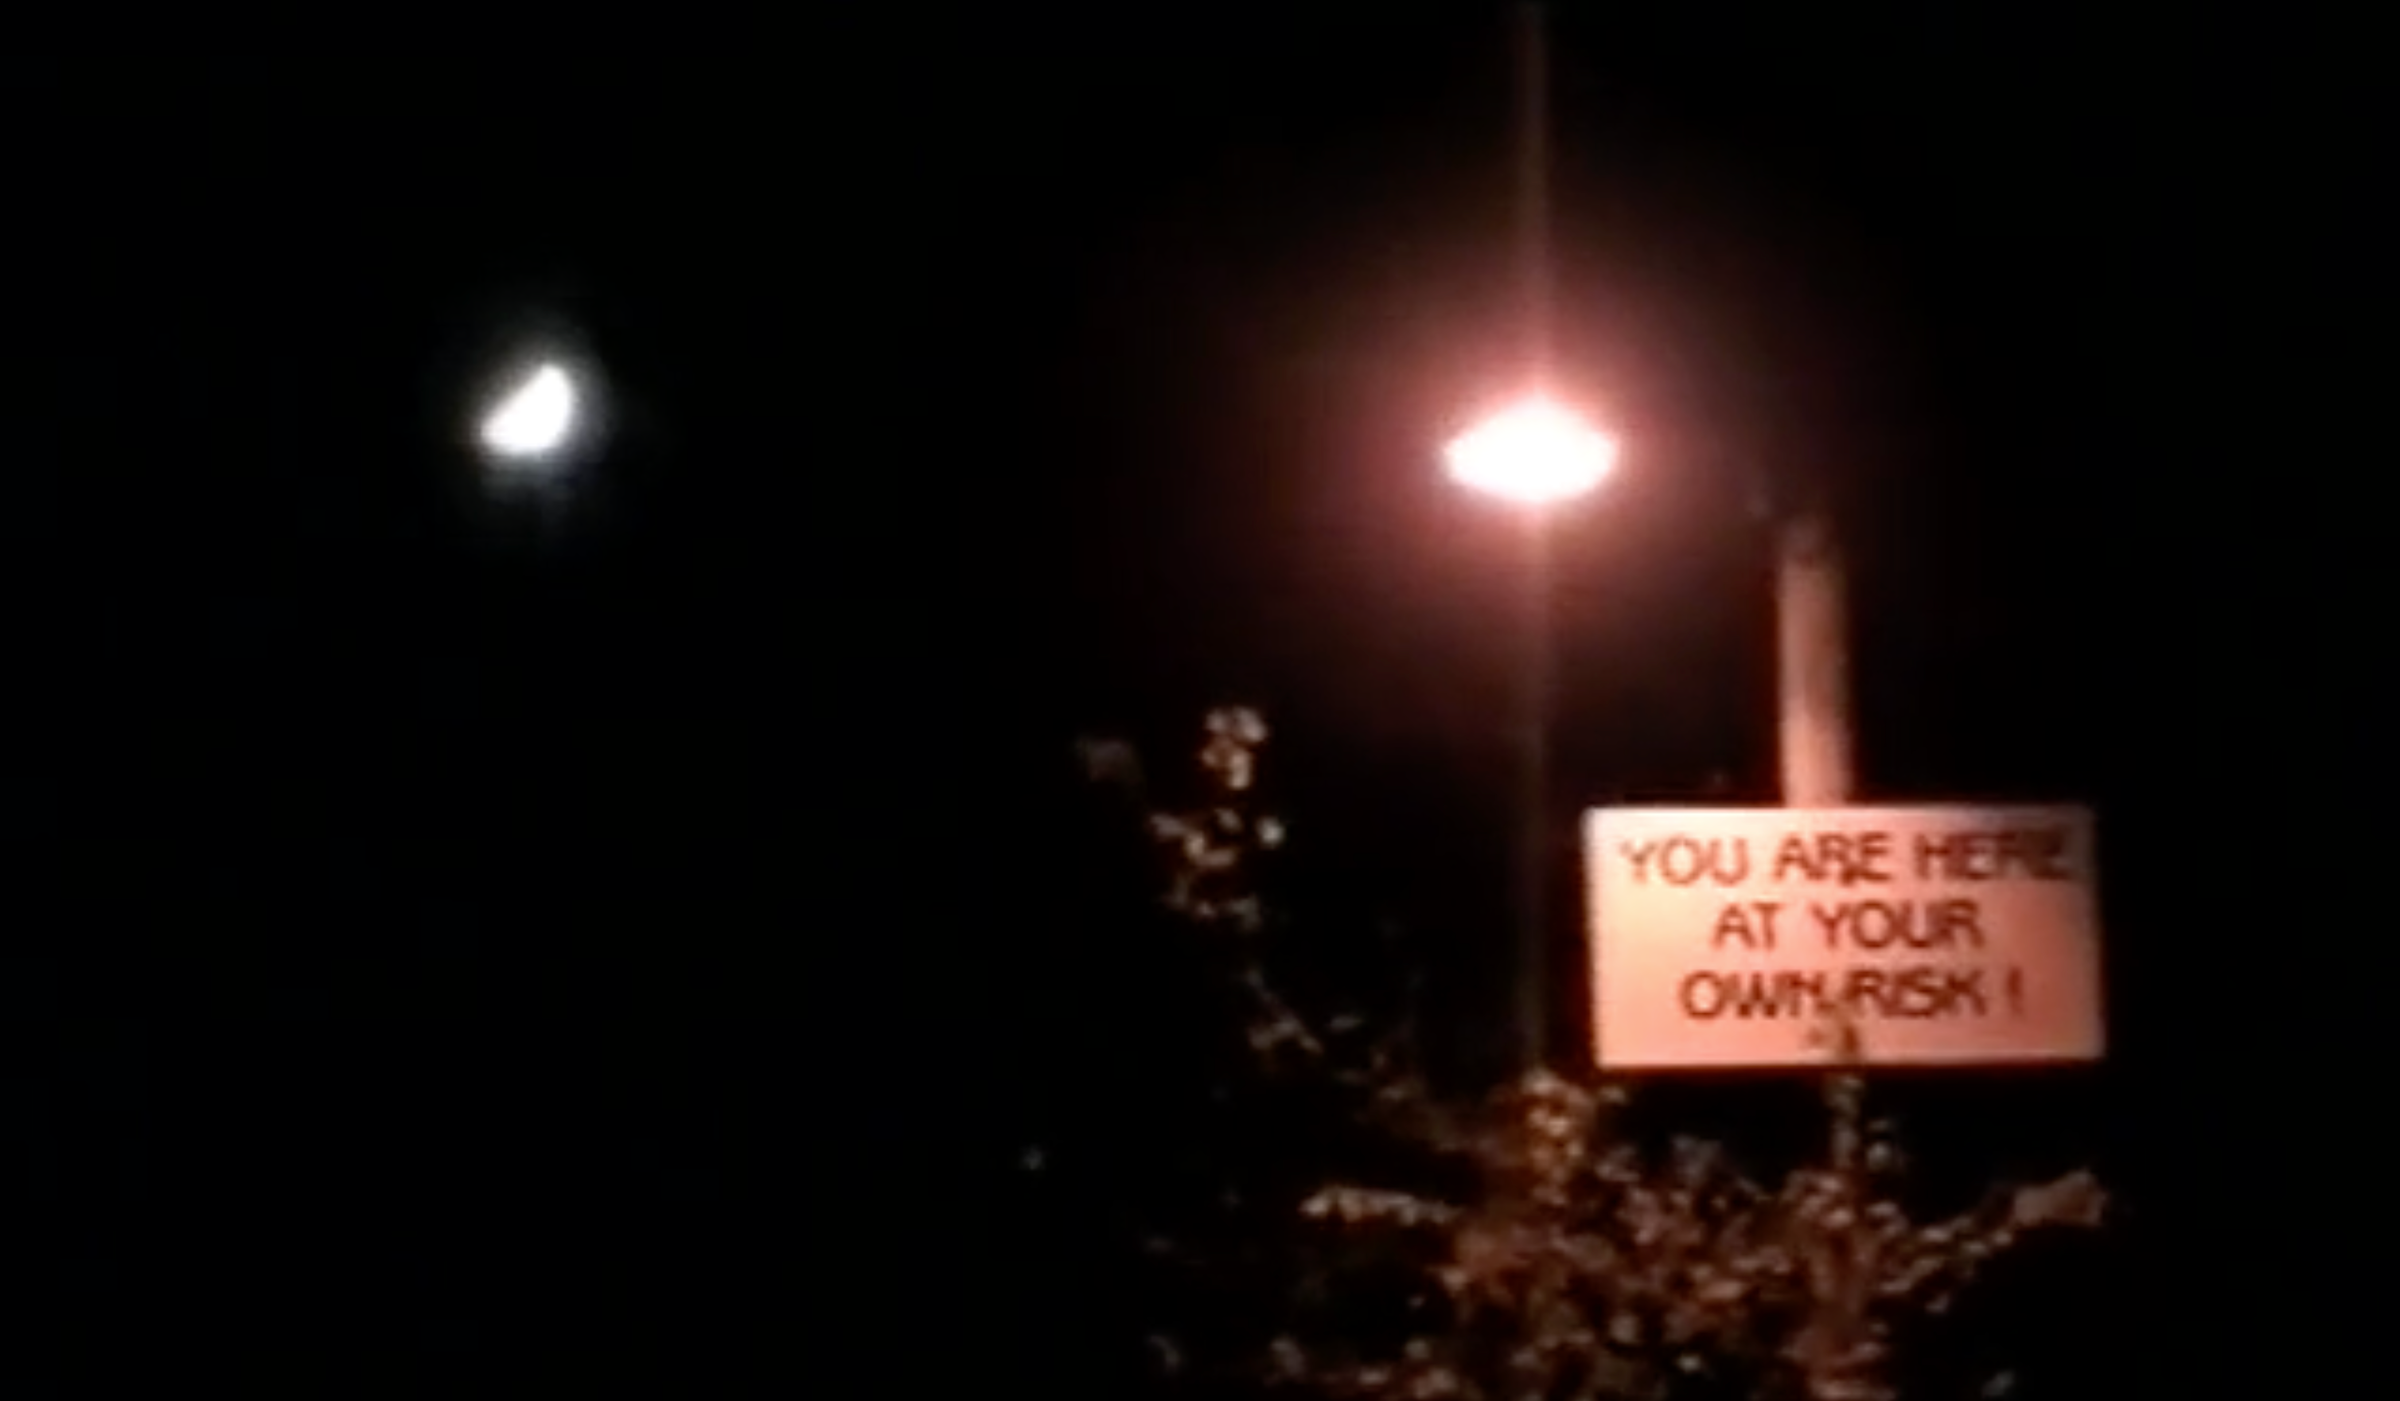 Image of a street lamp at night cast against a black night sky with the moon visible. A sign is attached to the street lamp which reads 'You are here at your own risk!'.